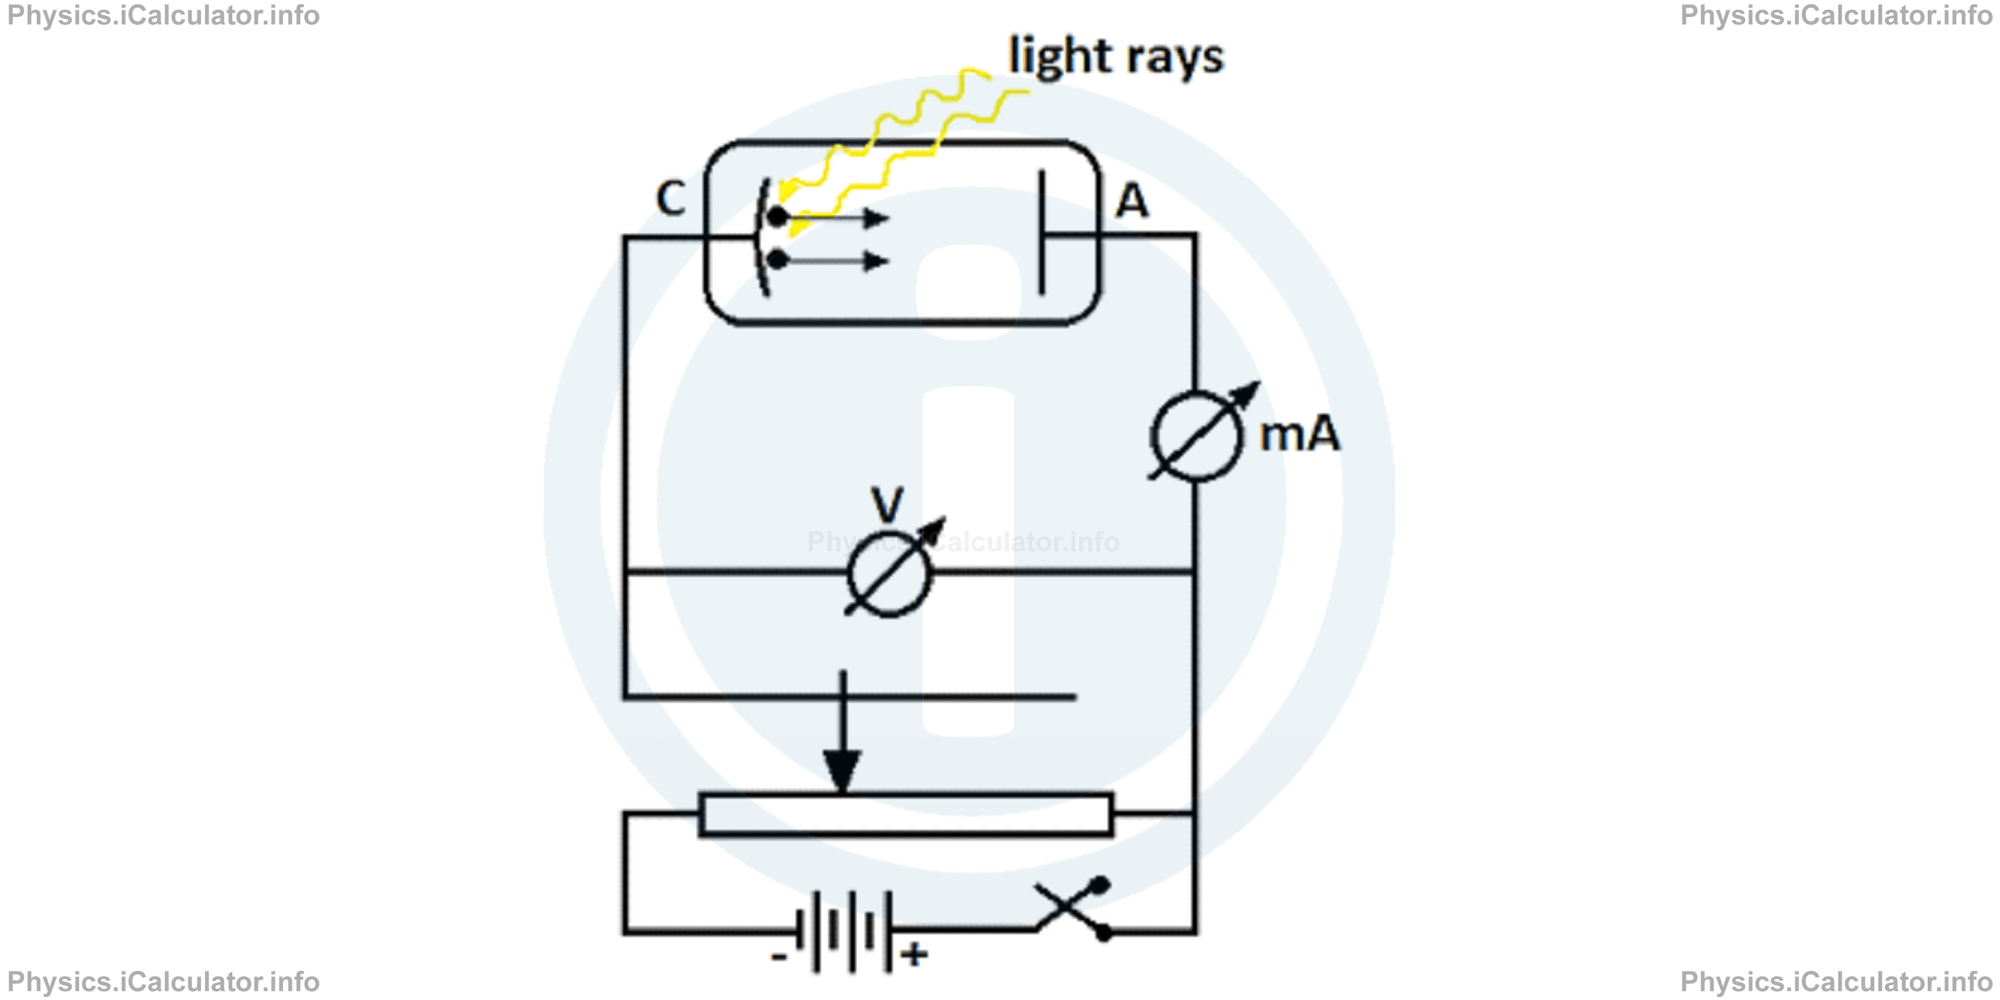 Physics Tutorials: This image provides visual information for the physics tutorial The Photoelectric Effect 